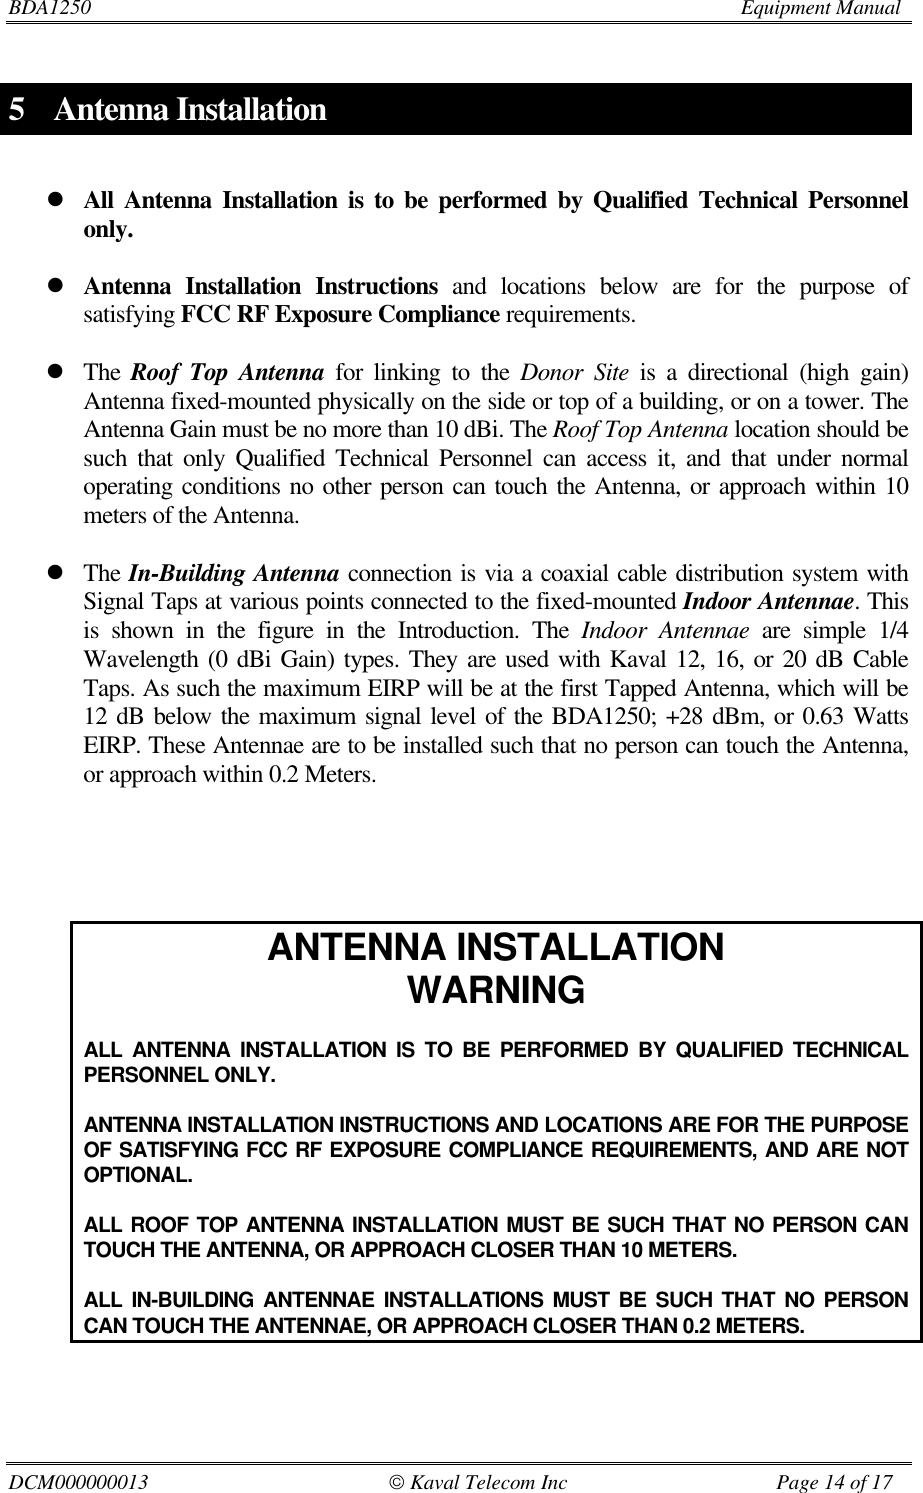 BDA1250                         Equipment ManualDCM000000013                                               Kaval Telecom Inc                                        Page 14 of 175 Antenna InstallationlAll Antenna Installation is to be performed by Qualified Technical Personnelonly.lAntenna Installation Instructions and locations below are for the purpose ofsatisfying FCC RF Exposure Compliance requirements.lThe Roof Top Antenna for linking to the Donor Site is a directional (high gain)Antenna fixed-mounted physically on the side or top of a building, or on a tower. TheAntenna Gain must be no more than 10 dBi. The Roof Top Antenna location should besuch that only Qualified Technical Personnel can access it, and that under normaloperating conditions no other person can touch the Antenna, or approach within 10meters of the Antenna.lThe In-Building Antenna connection is via a coaxial cable distribution system withSignal Taps at various points connected to the fixed-mounted Indoor Antennae. Thisis shown in the figure in the Introduction. The Indoor Antennae are simple 1/4Wavelength (0 dBi Gain) types. They are used with Kaval 12, 16, or 20 dB CableTaps. As such the maximum EIRP will be at the first Tapped Antenna, which will be12 dB below the maximum signal level of the BDA1250; +28 dBm, or 0.63 WattsEIRP. These Antennae are to be installed such that no person can touch the Antenna,or approach within 0.2 Meters.ANTENNA INSTALLATIONWARNINGALL ANTENNA INSTALLATION IS TO BE PERFORMED BY QUALIFIED TECHNICALPERSONNEL ONLY.ANTENNA INSTALLATION INSTRUCTIONS AND LOCATIONS ARE FOR THE PURPOSEOF SATISFYING FCC RF EXPOSURE COMPLIANCE REQUIREMENTS, AND ARE NOTOPTIONAL.ALL ROOF TOP ANTENNA INSTALLATION MUST BE SUCH THAT NO PERSON CANTOUCH THE ANTENNA, OR APPROACH CLOSER THAN 10 METERS.ALL IN-BUILDING ANTENNAE INSTALLATIONS MUST BE SUCH THAT NO PERSONCAN TOUCH THE ANTENNAE, OR APPROACH CLOSER THAN 0.2 METERS.